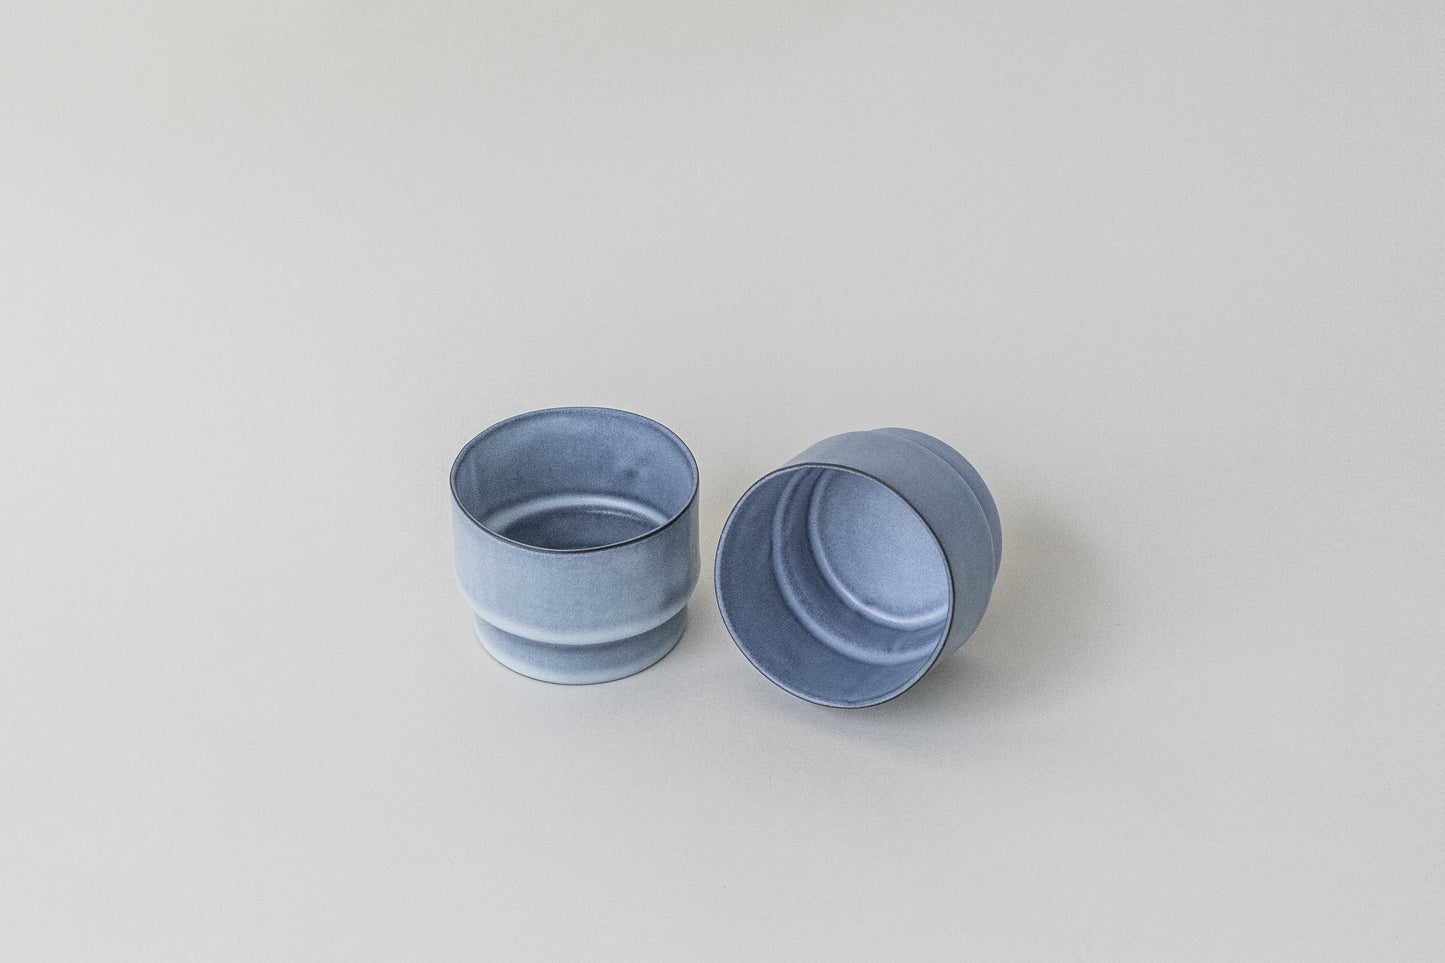 Stacking Cup in Blue